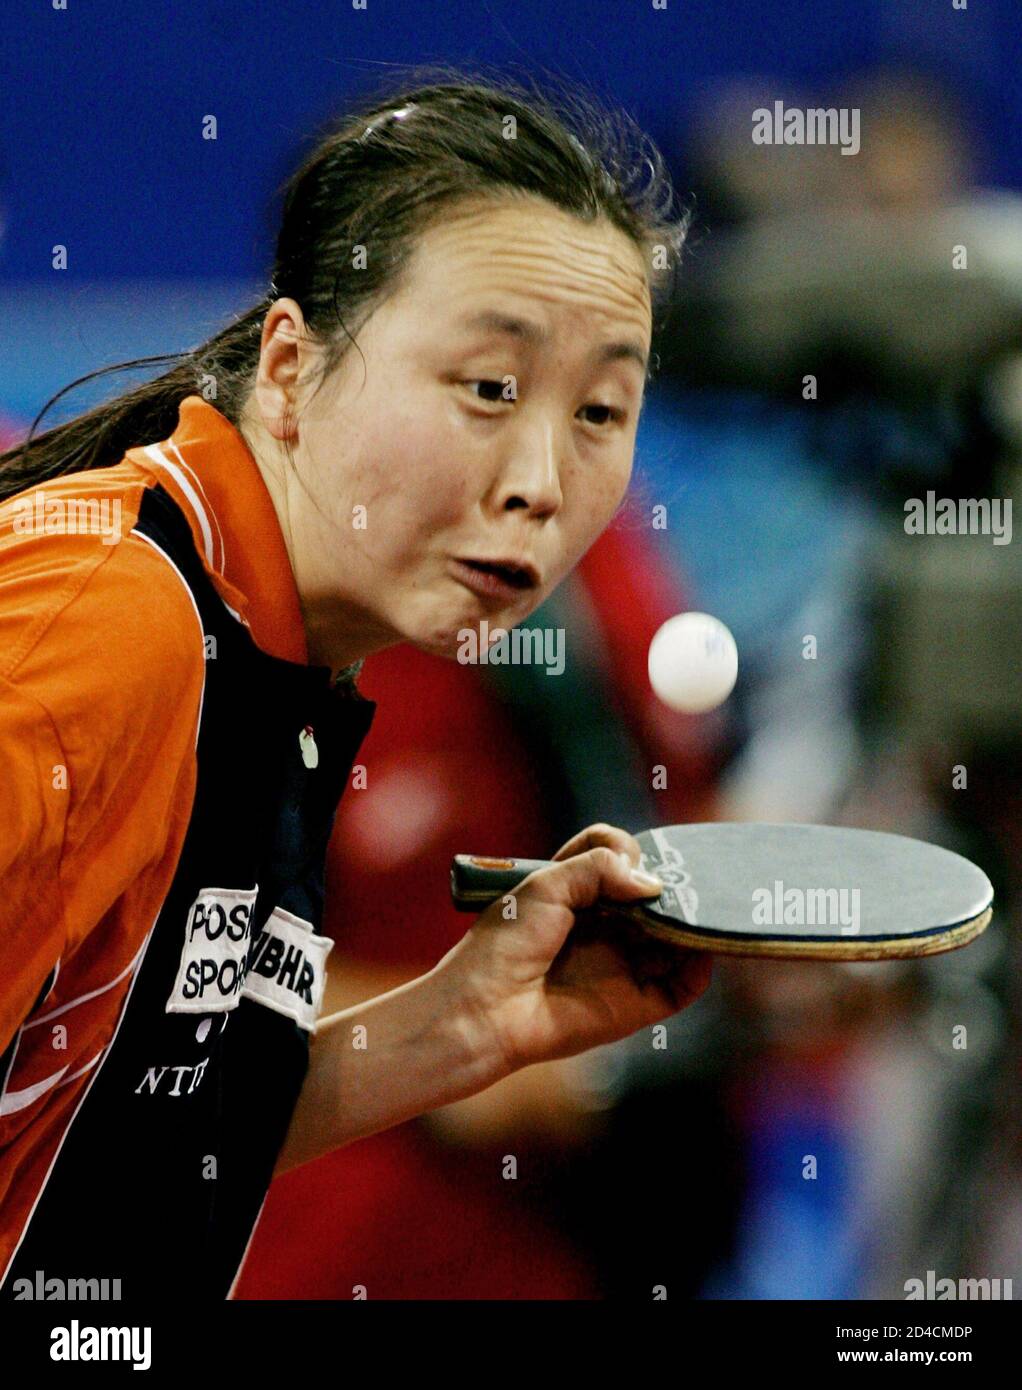 Li Jiao of the Netherlands serves at the women singles round four match against [Moon Hyun-jung of South Korea] at the 48th World Table Tennis Championship in Shanghai, China, May 4, 2005. Li won 4-3. Stock Photo